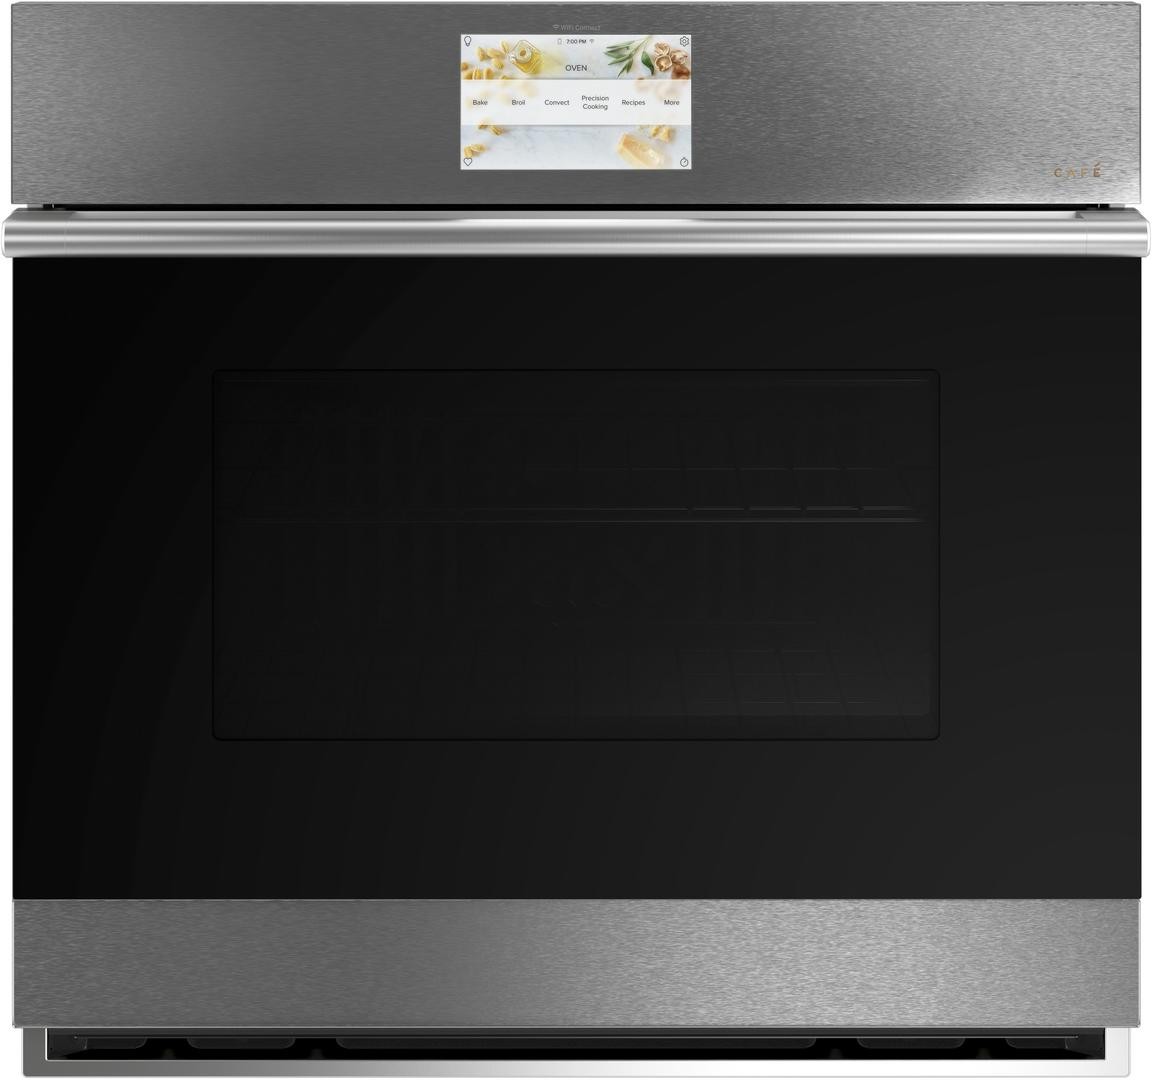 Cafe Modern Glass 30 Single Electric Wall Oven CTS70DM2NS5